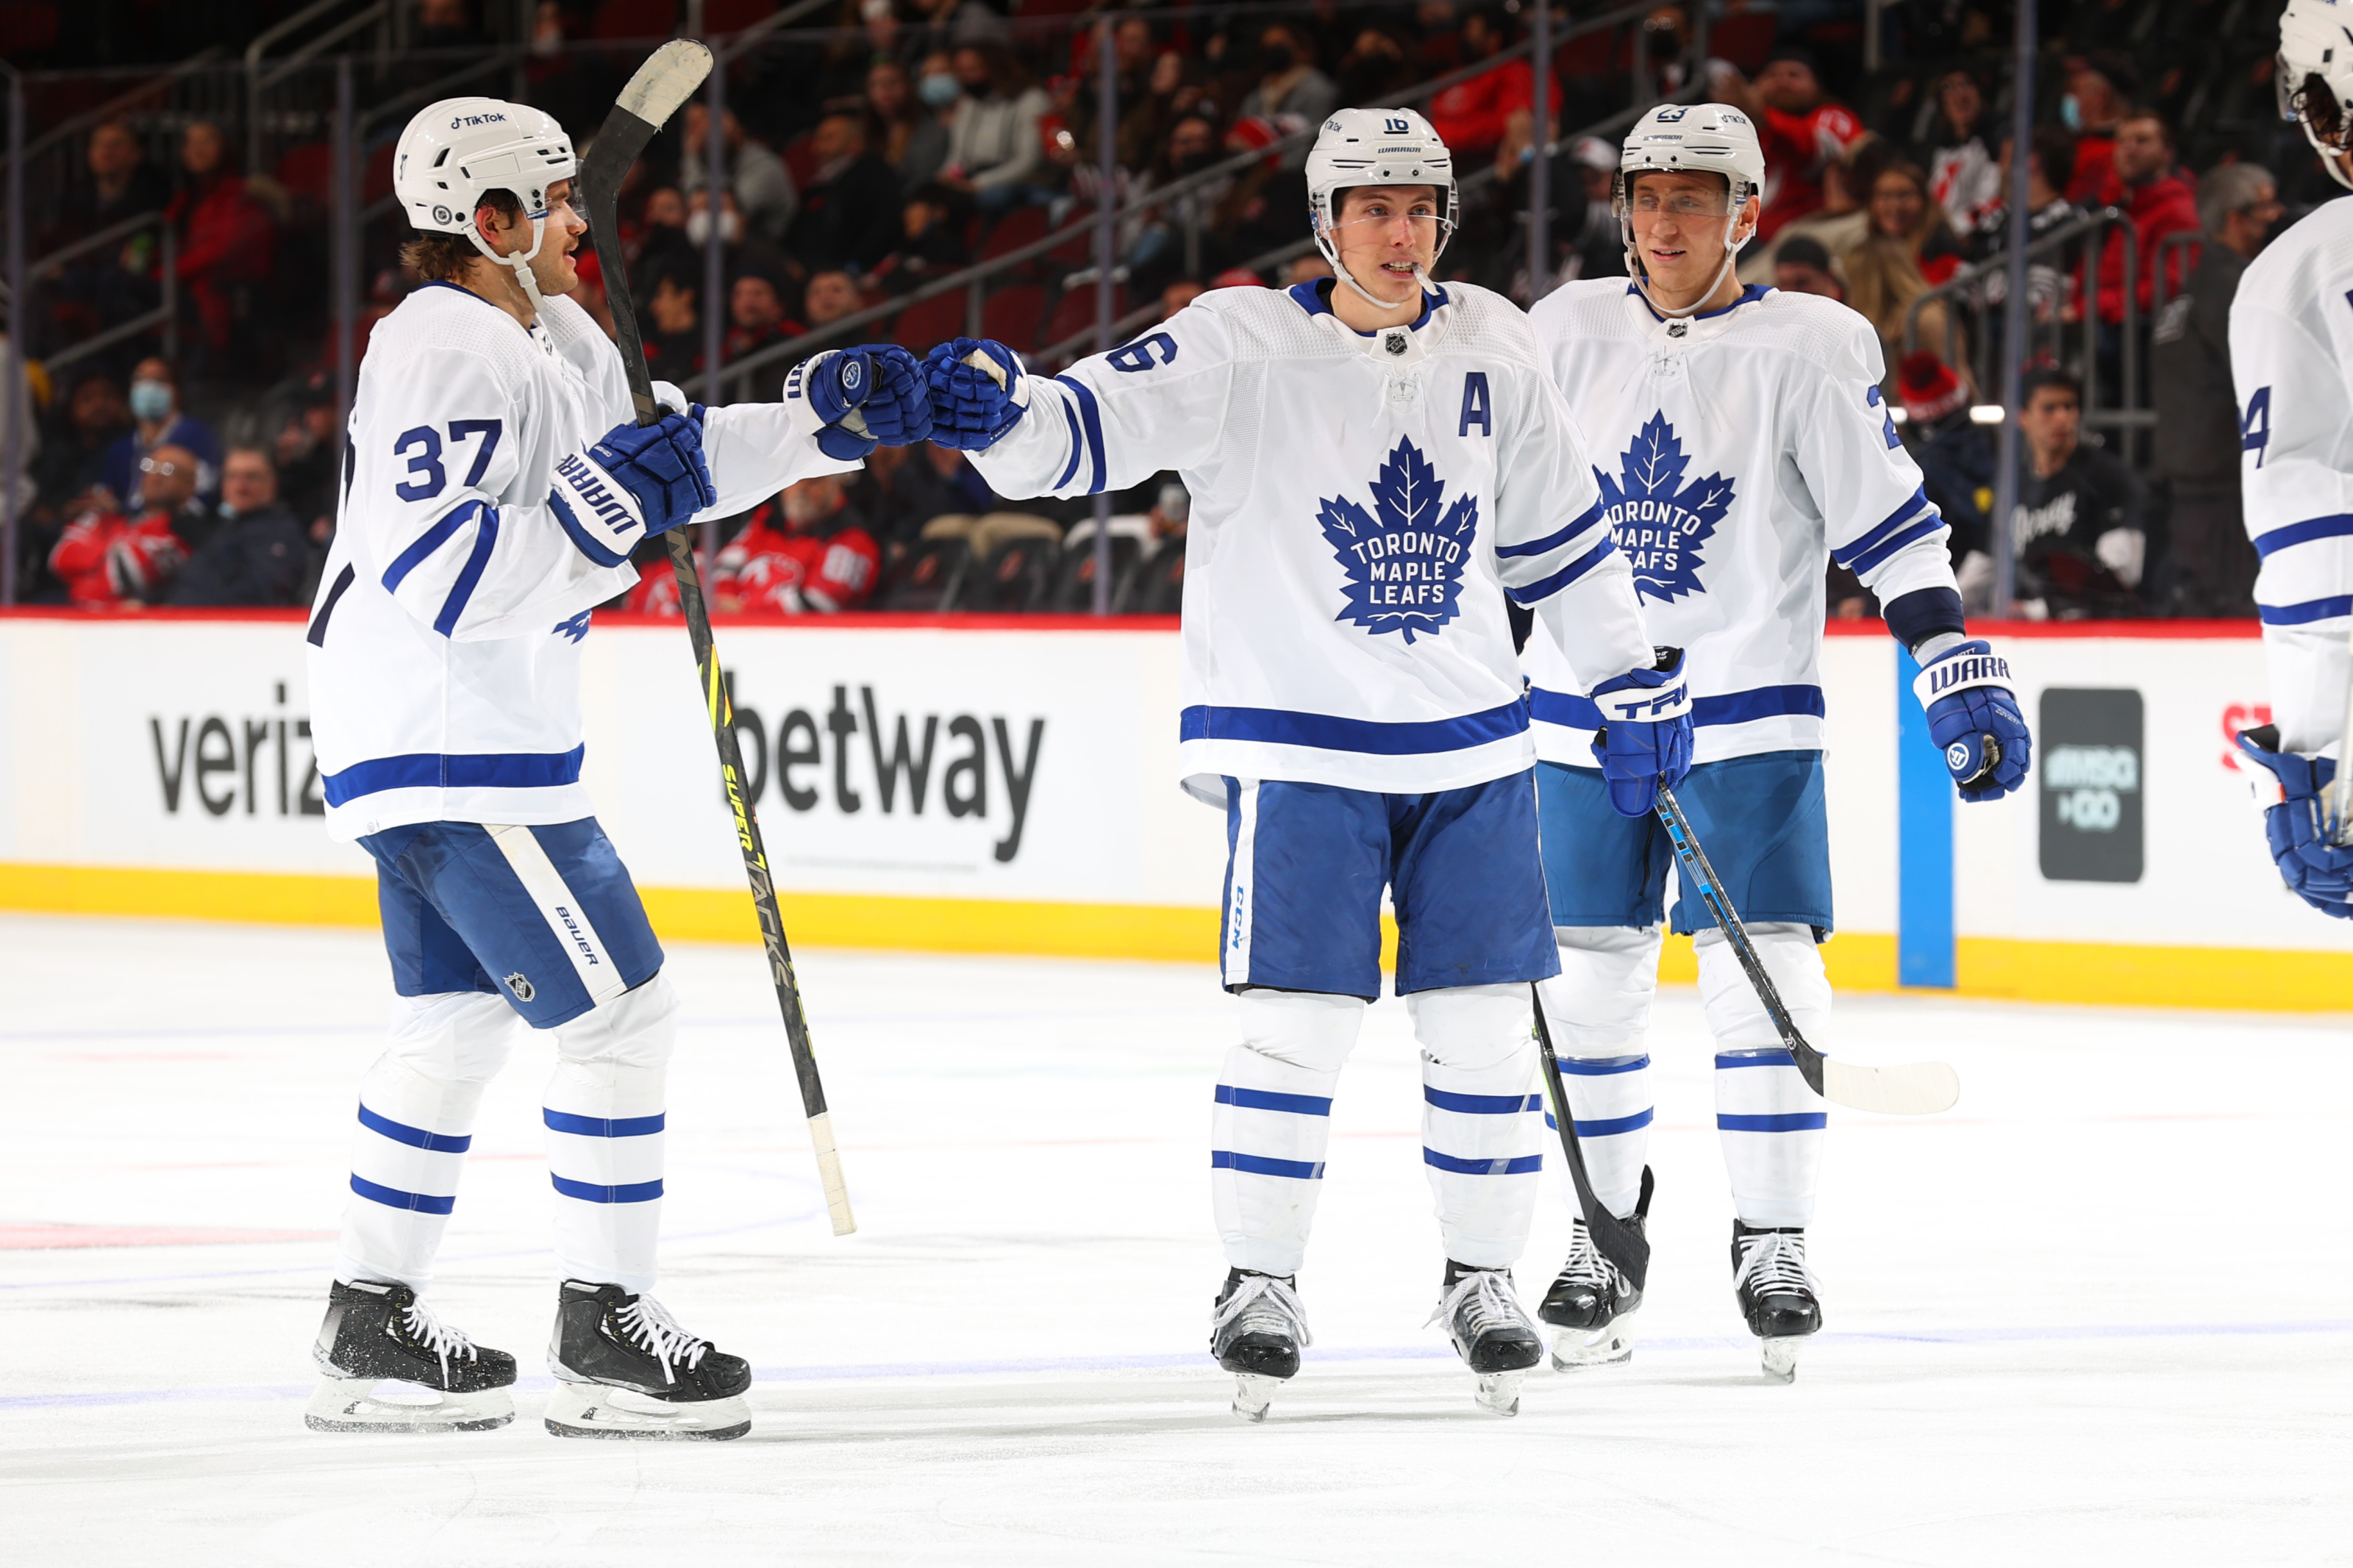 Marner scores twice in Maple Leafs' 7-1 win over Devils